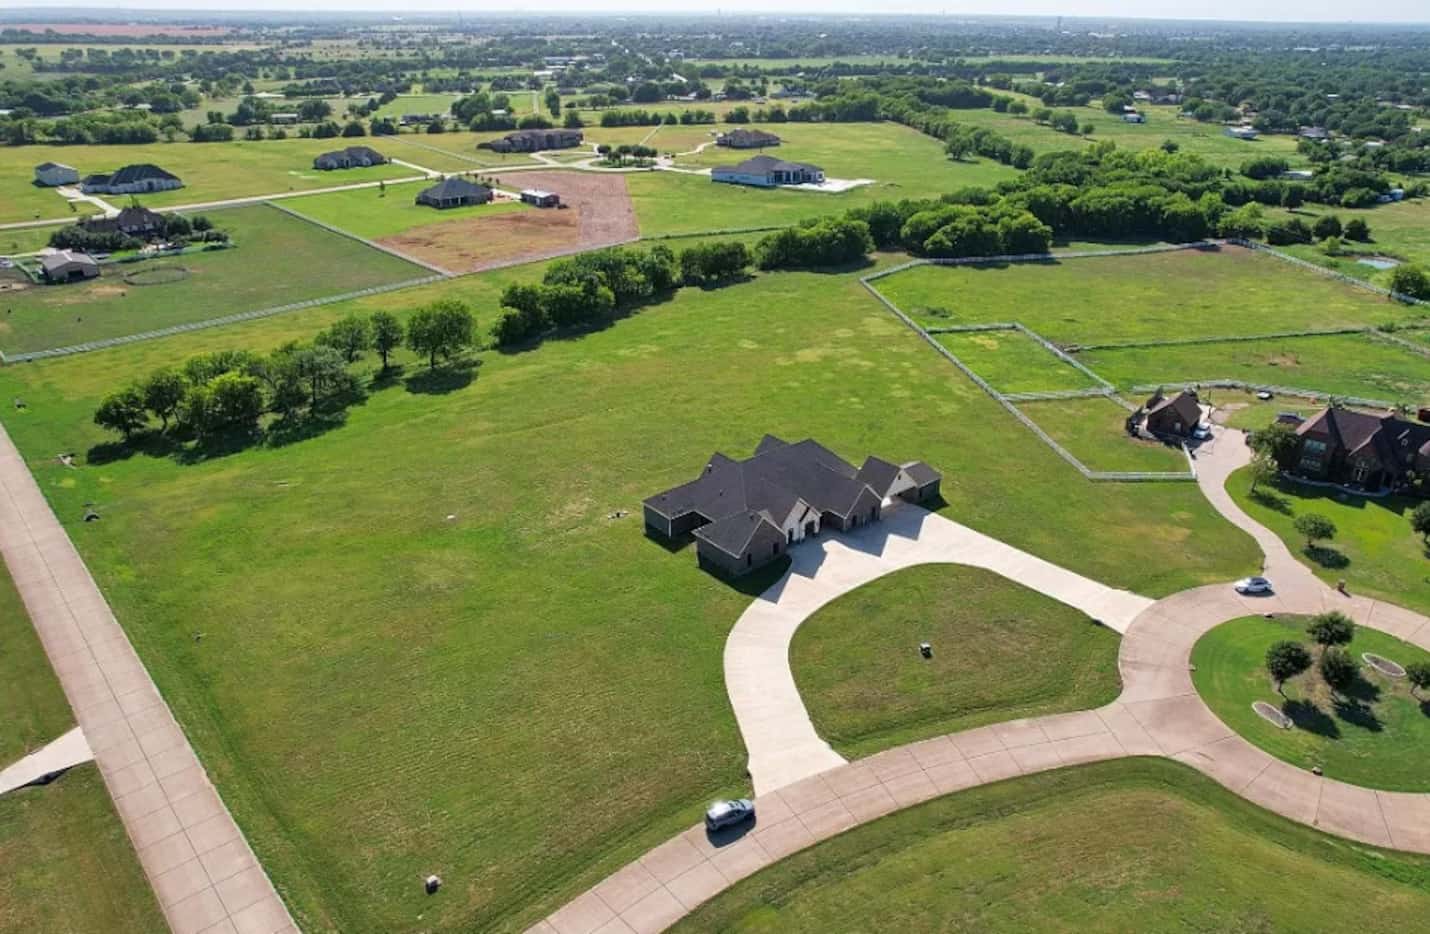 Overhead view of large home on multi-acre lot with green grass and a row of trees